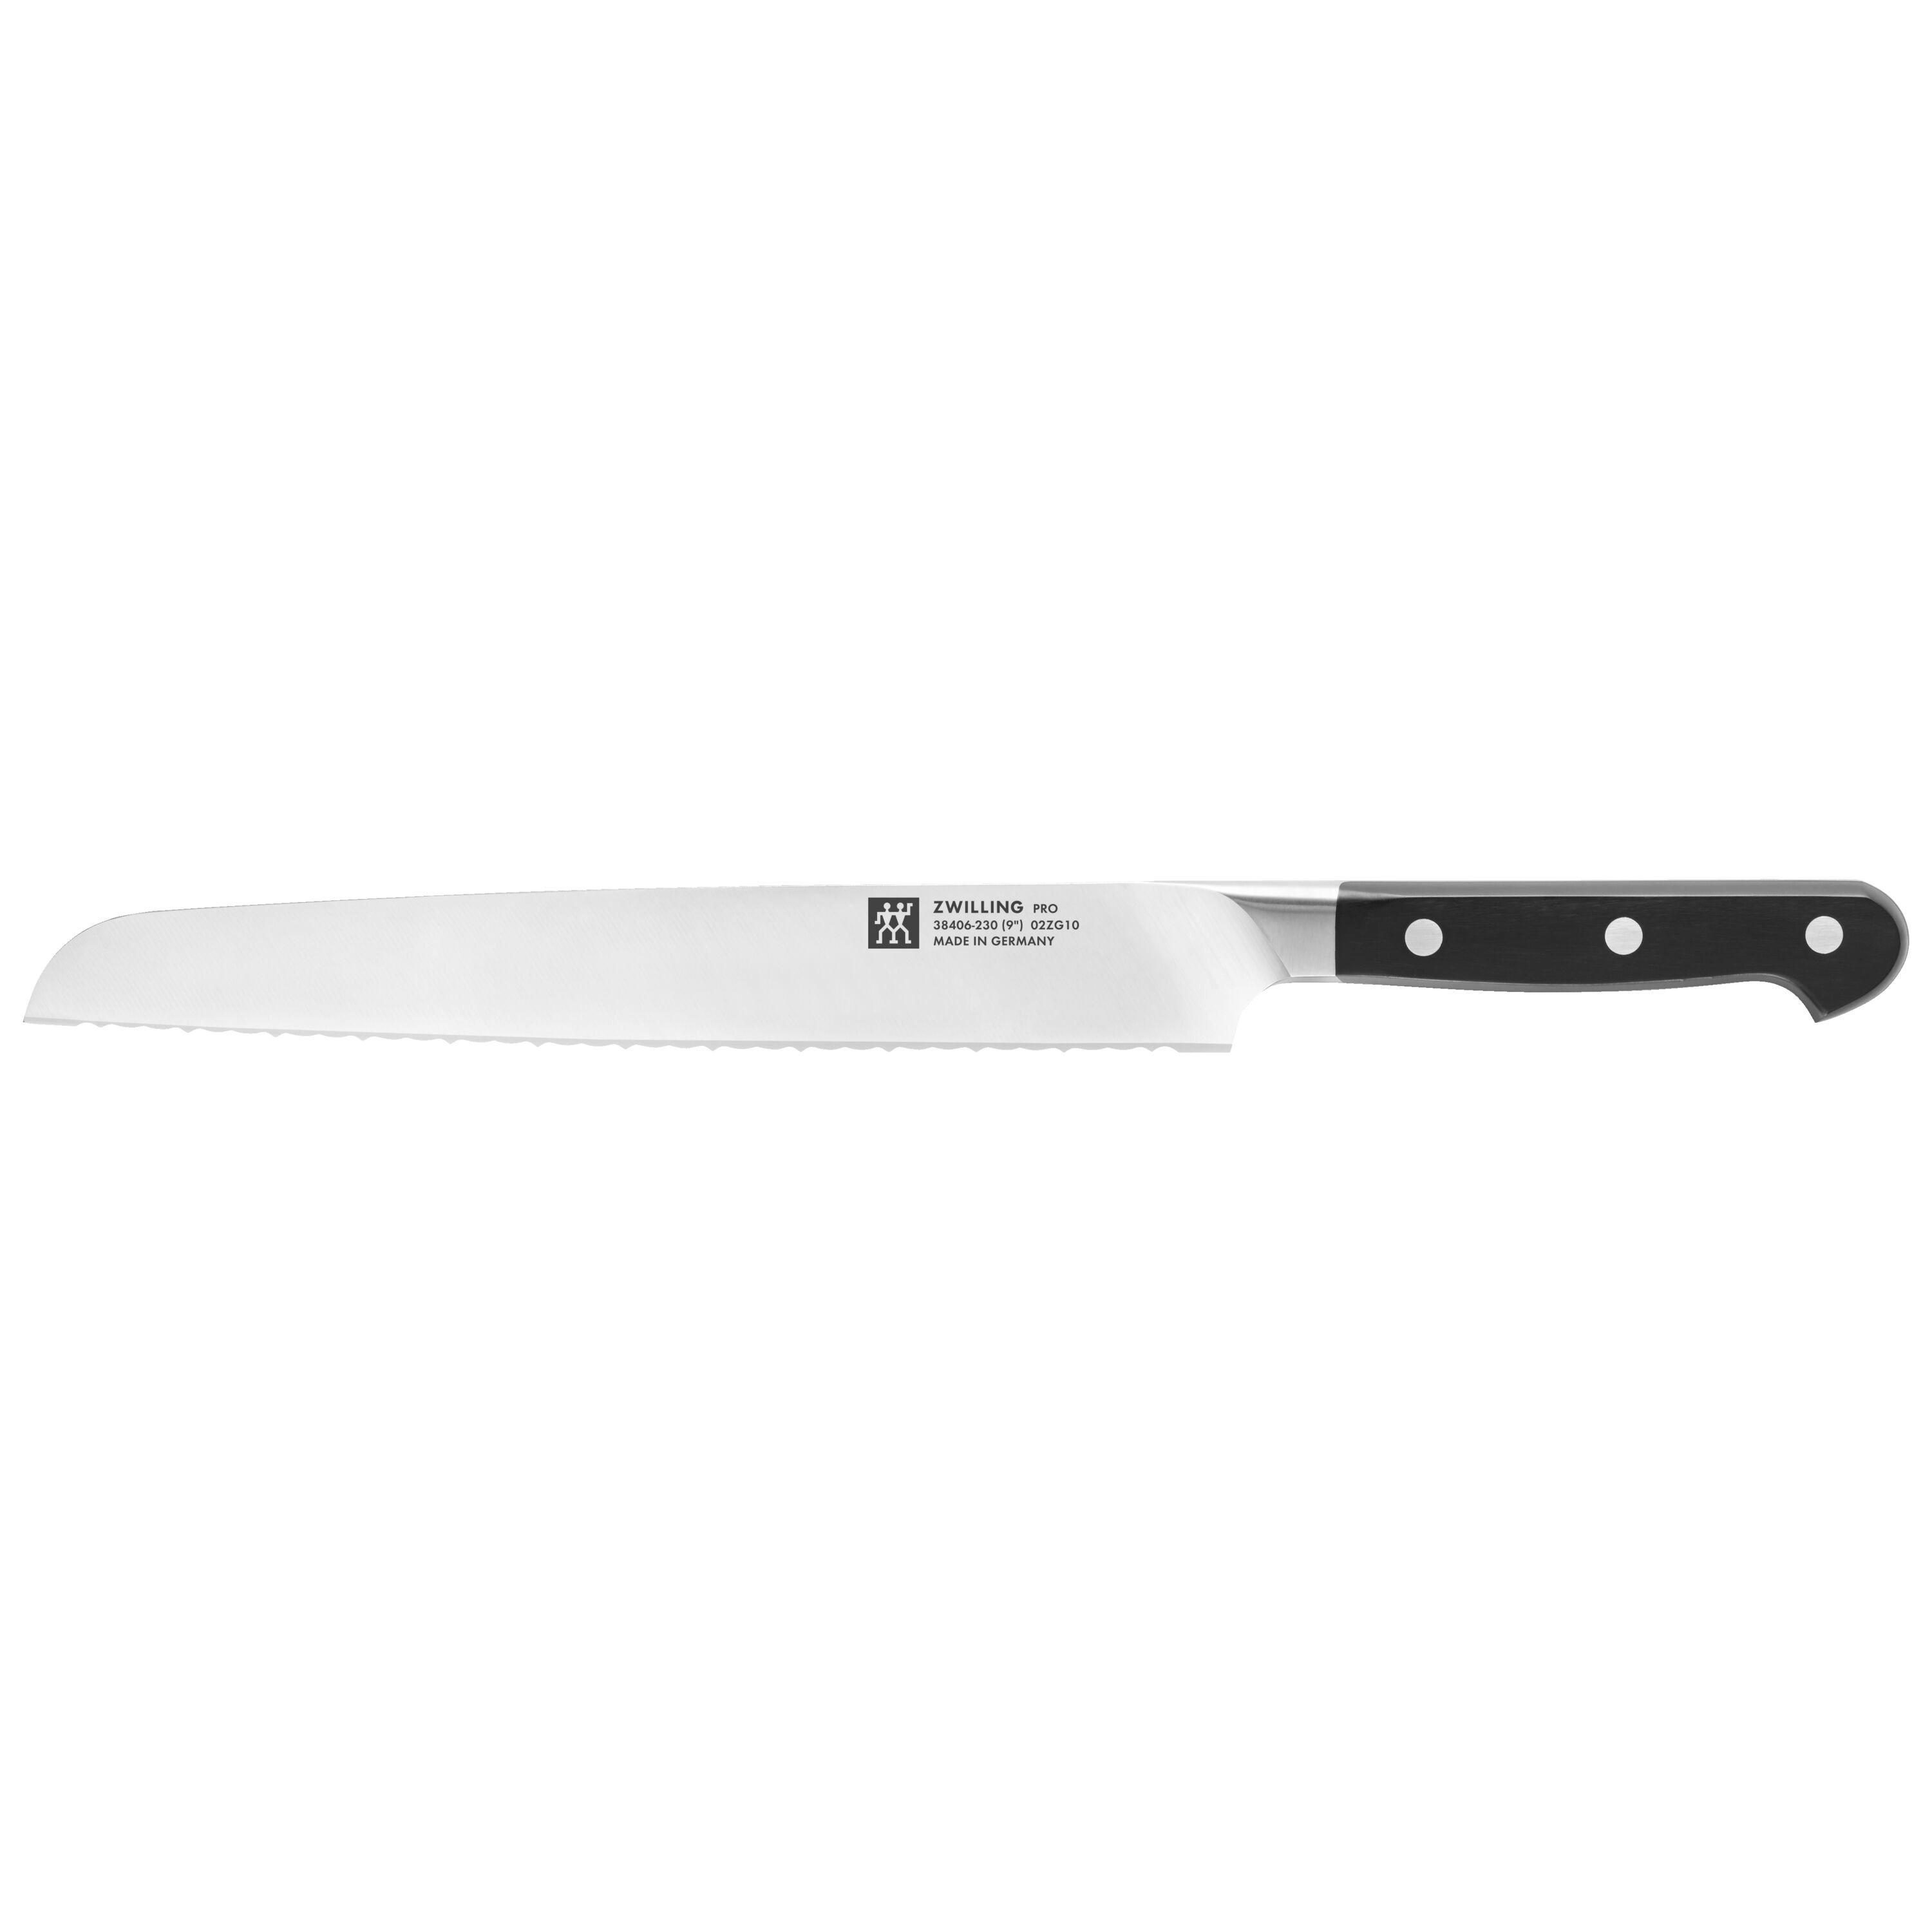 Made In Cookware - 9 Inch Bread Knife - Made in France - Full